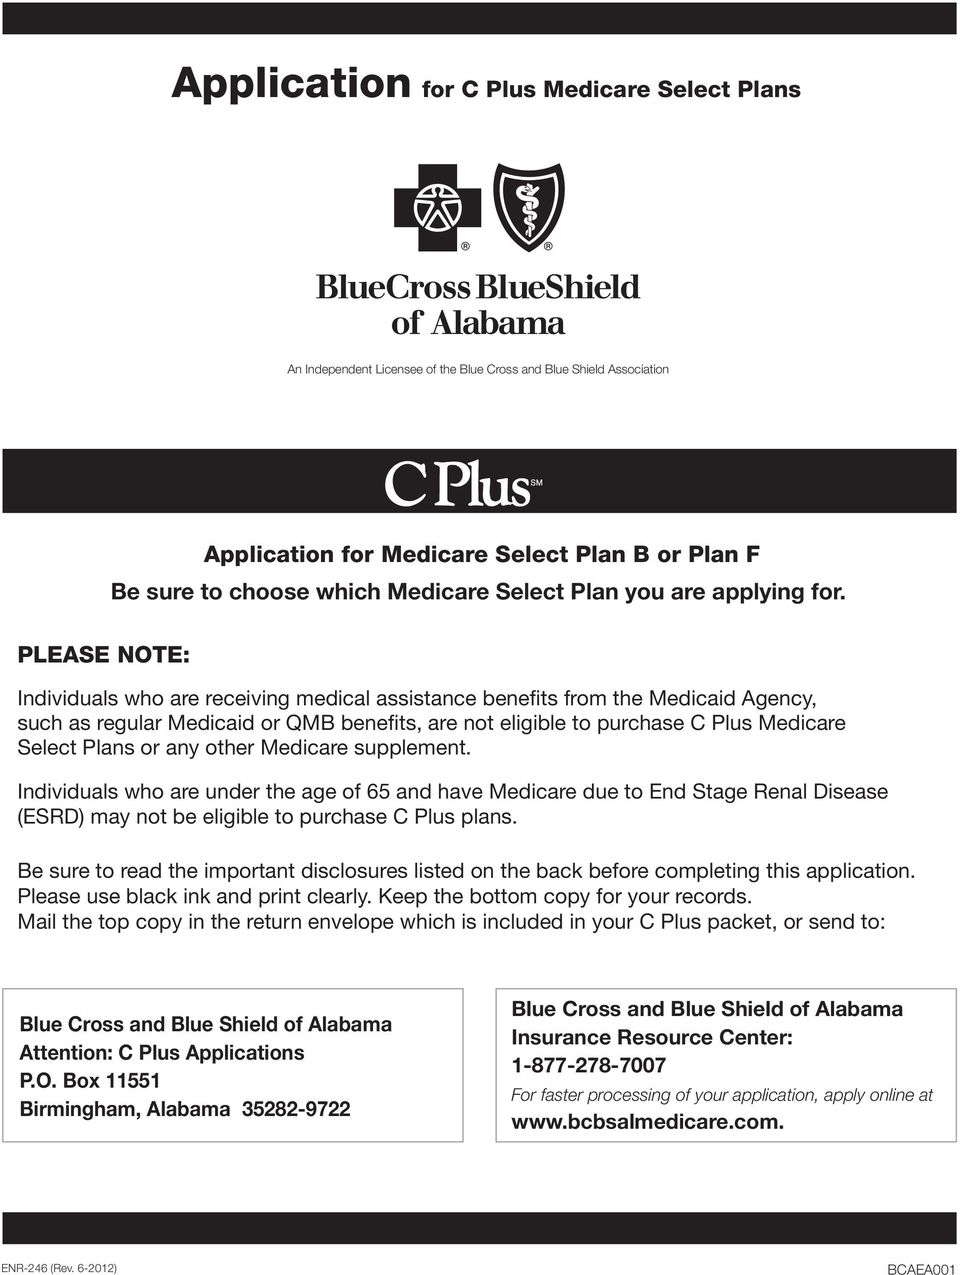 PLEASE NOTE: Individuals who are receiving medical assistance benefits from the Medicaid Agency, such as regular Medicaid or QMB benefits, are not eligible to purchase C Plus Medicare Select Plans or